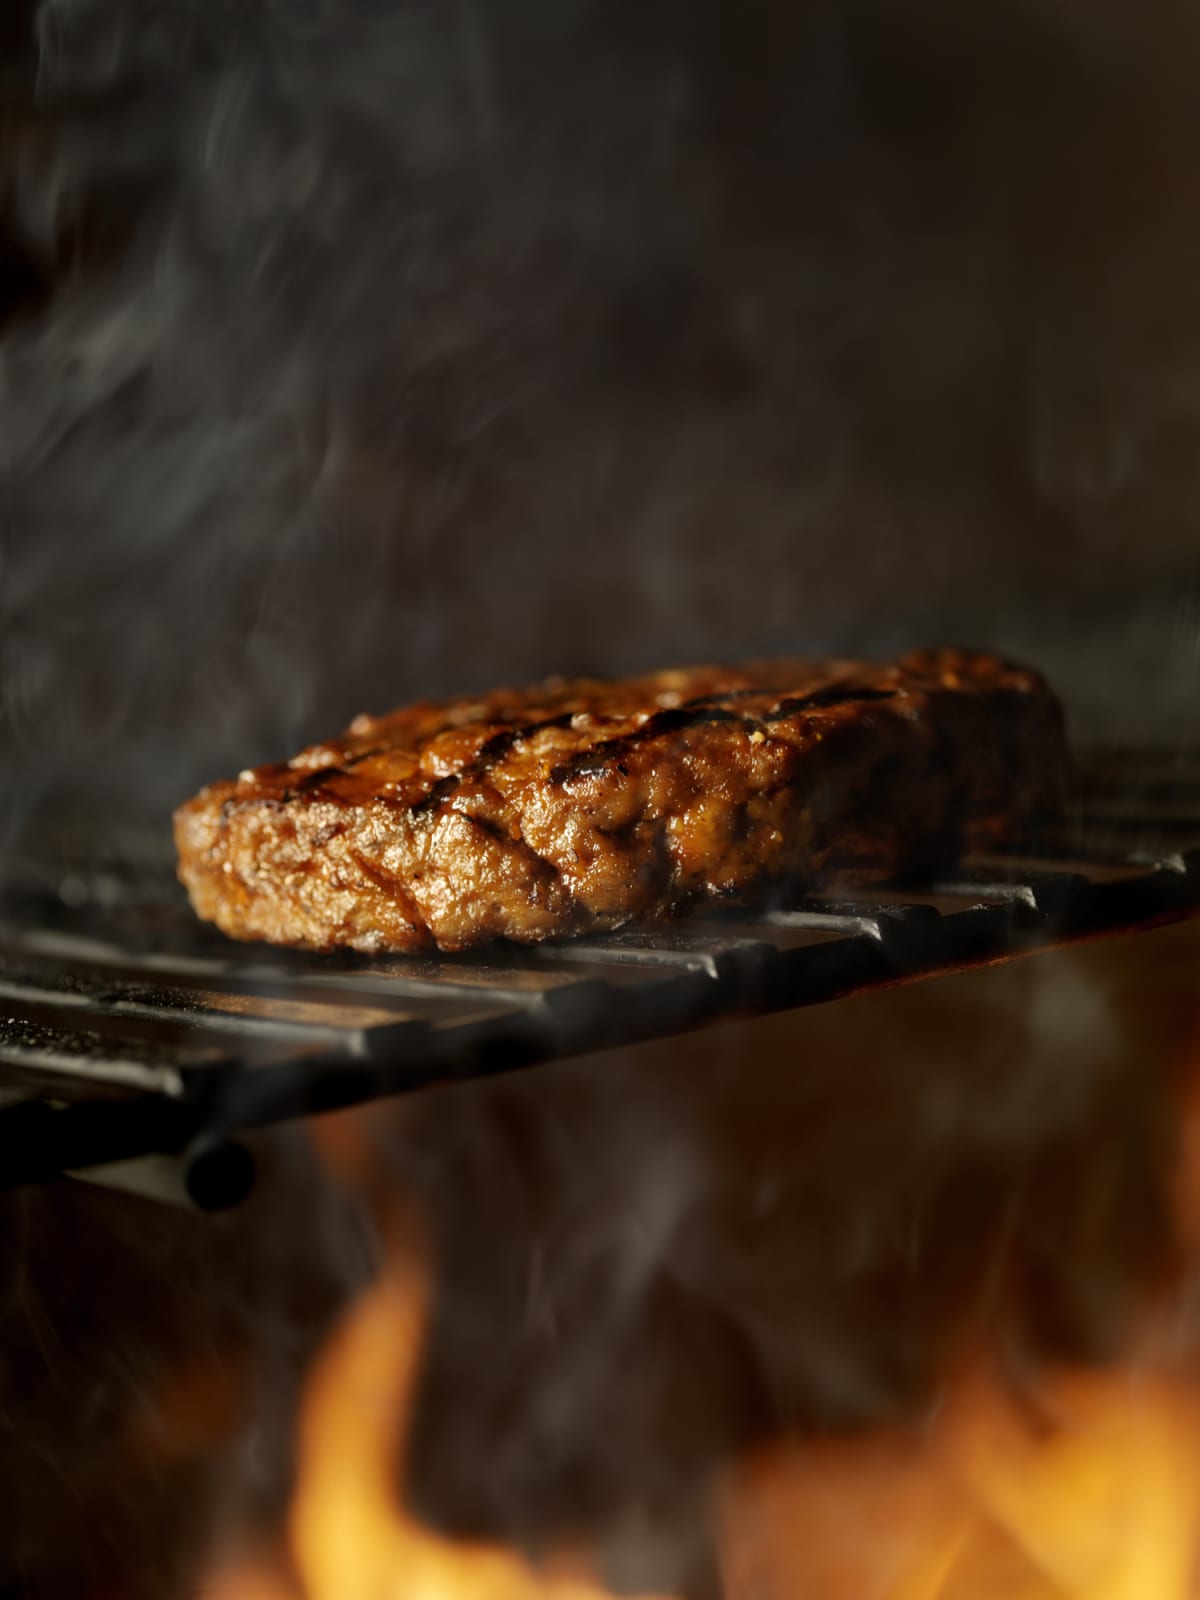 Burger being grilled on grill with smoke rising